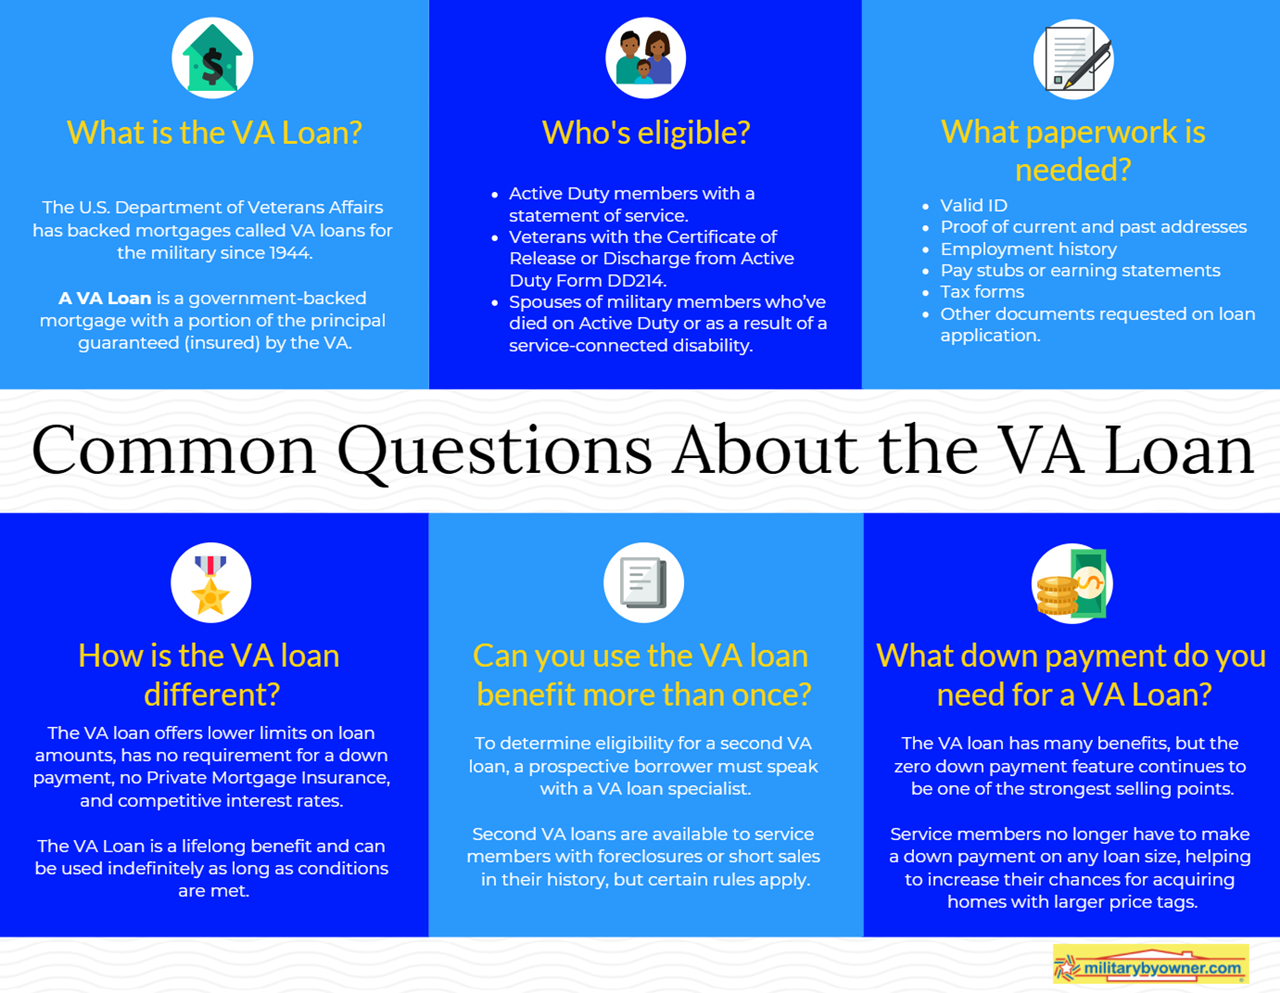 common questions about the VA loan graphic